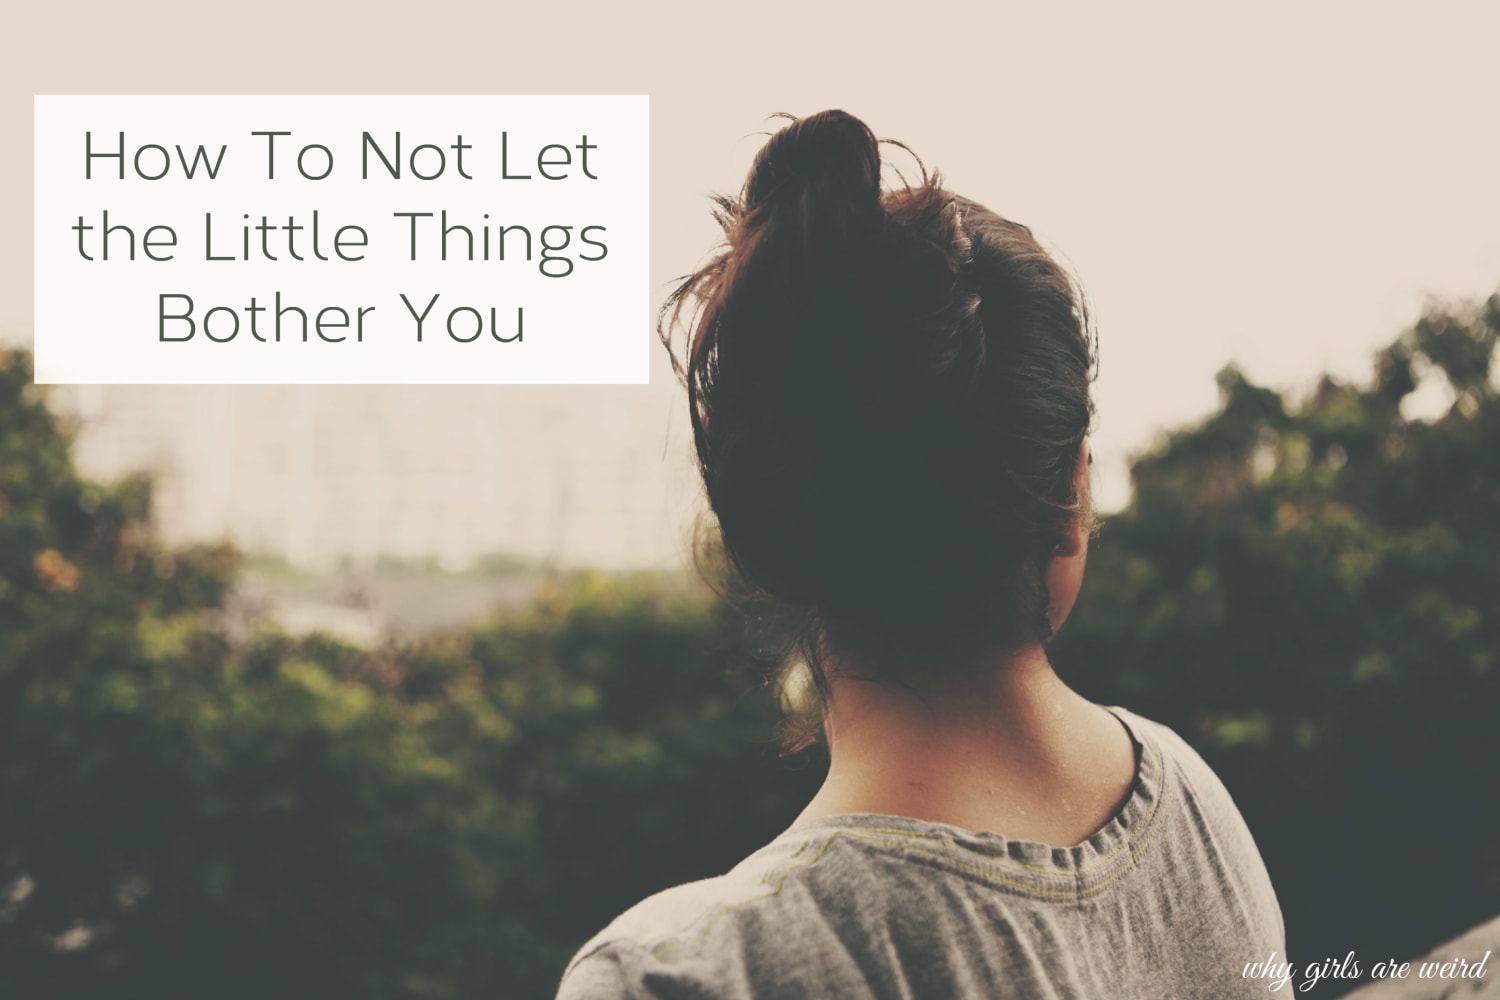 How To Not Let the Little Things Bother You